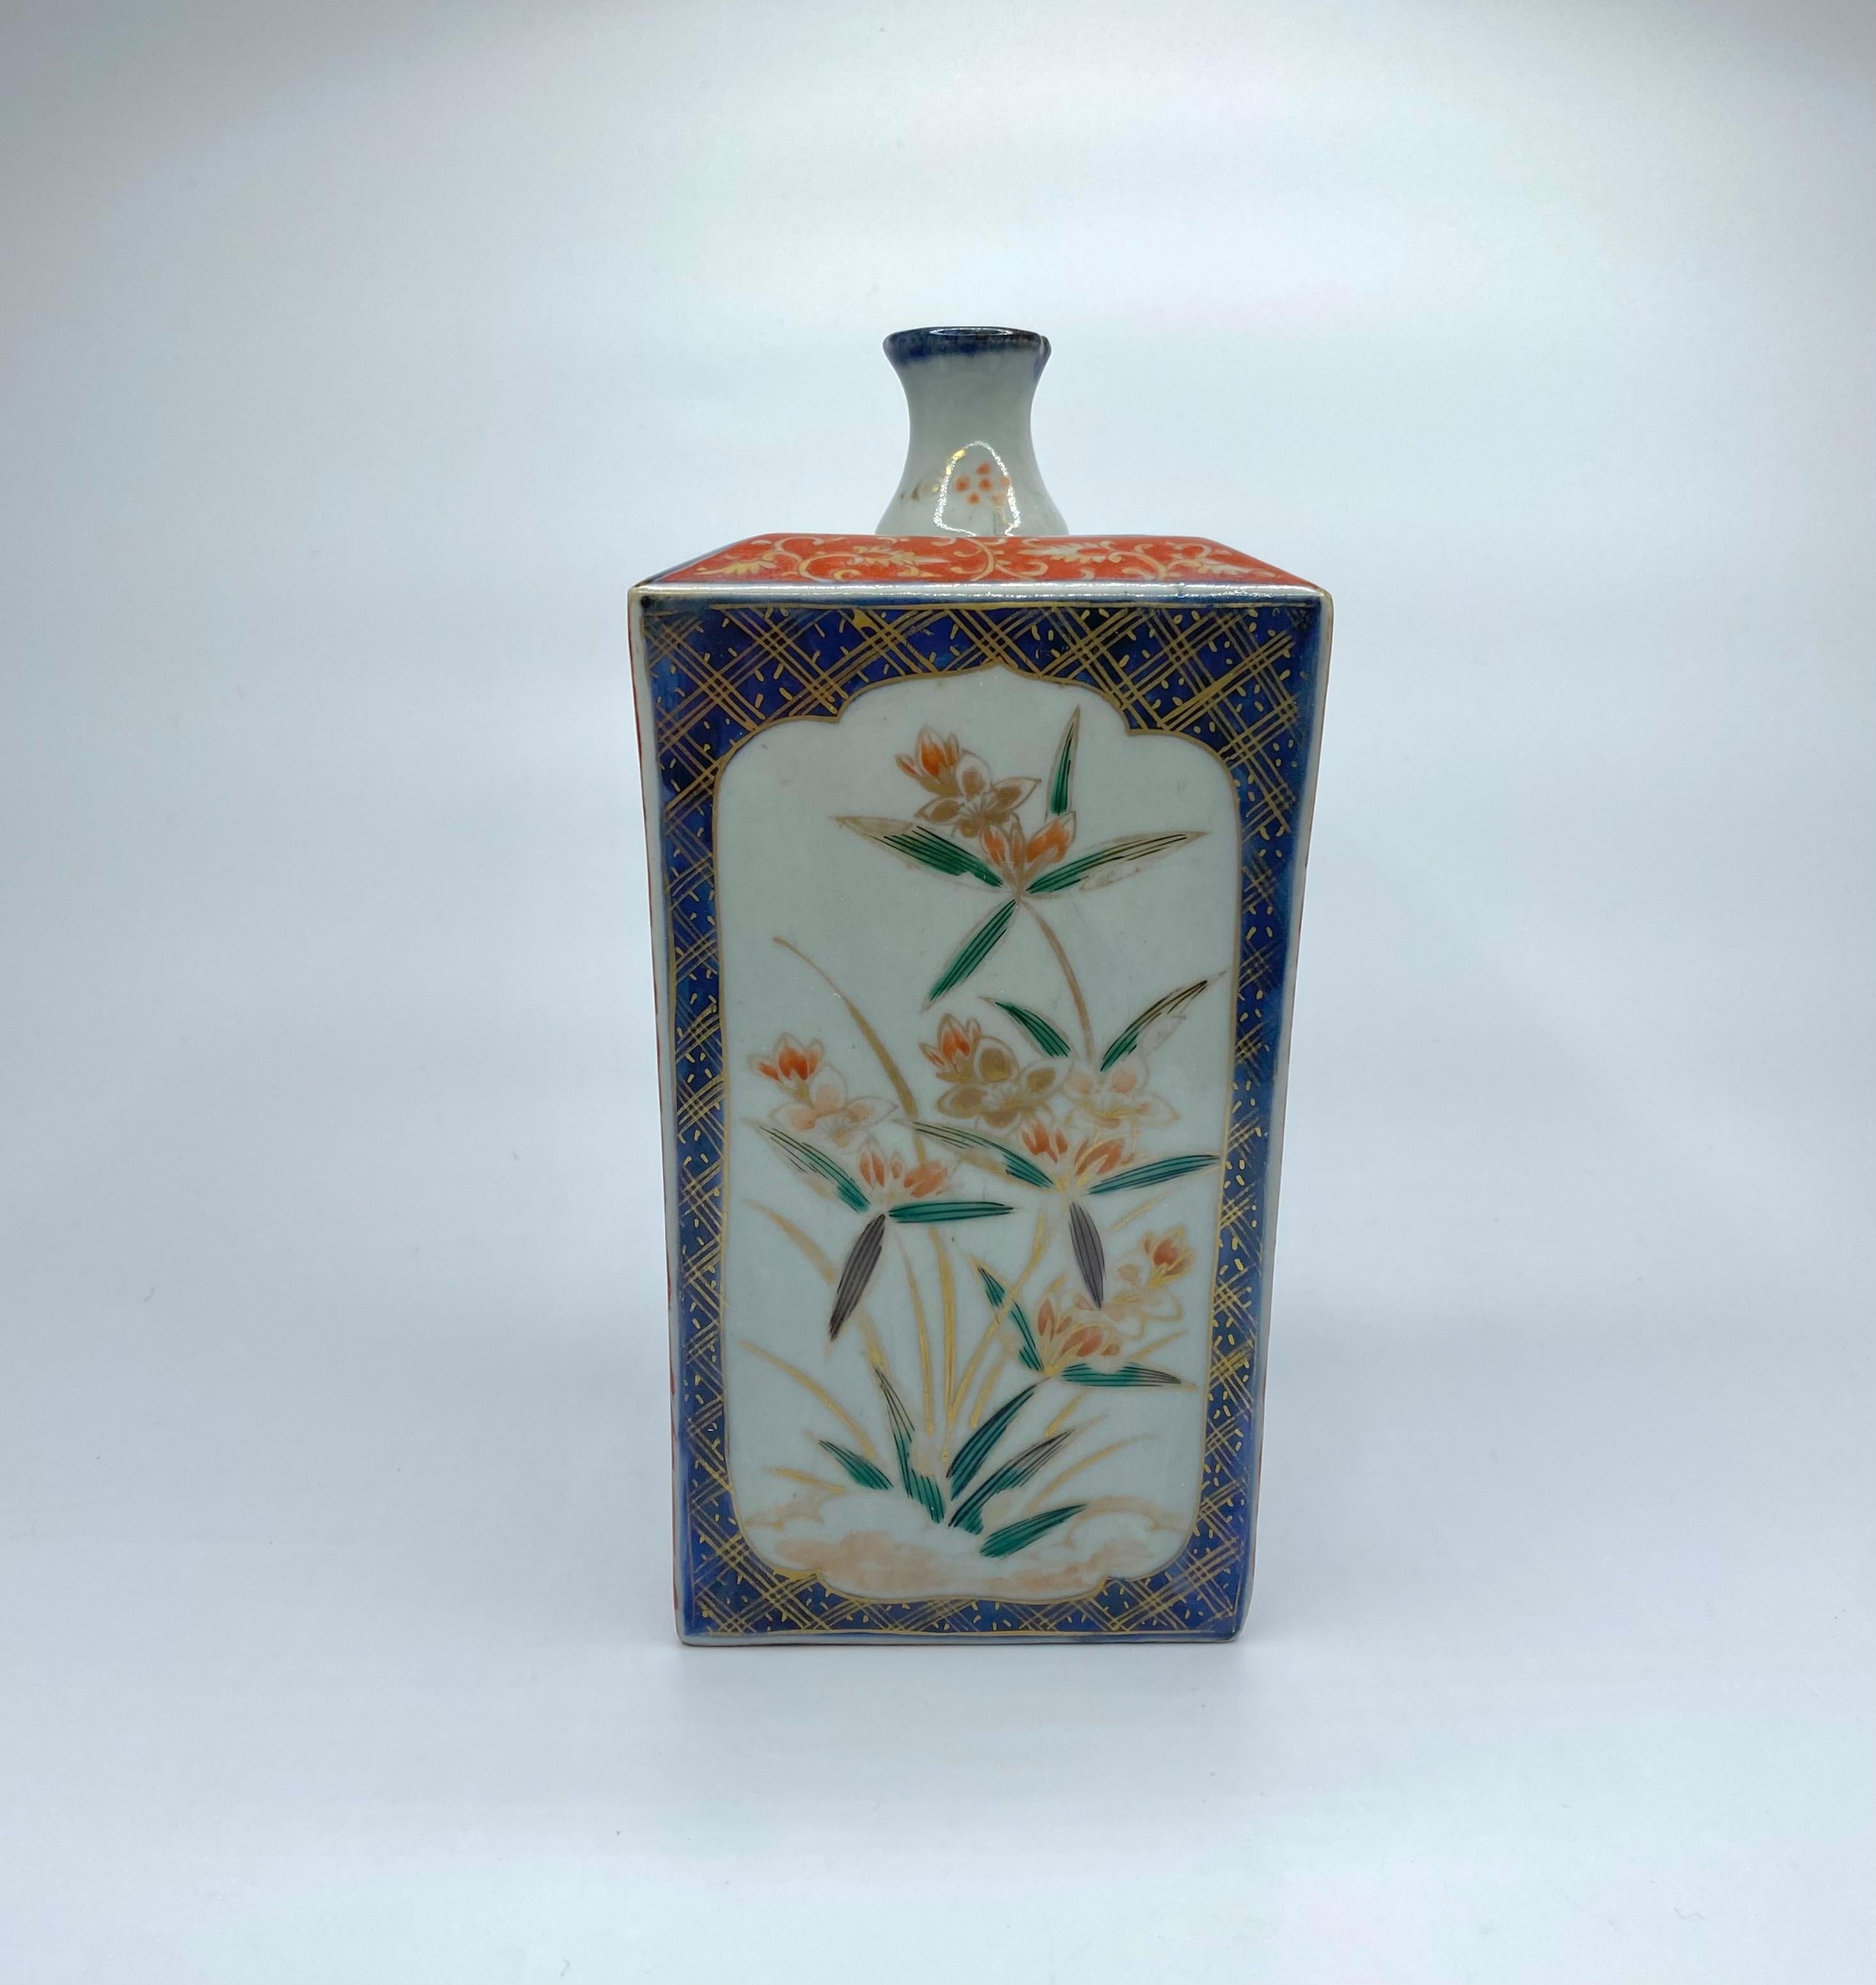 Japanese Imari porcelain tokuri, Arita, circa 1700, Genroku Period. The squared vessel painted with shaped panels of flowering plants, upon textile design inspired grounds. Rising to a similarly decorated raised shoulder, surmounted by a shaped